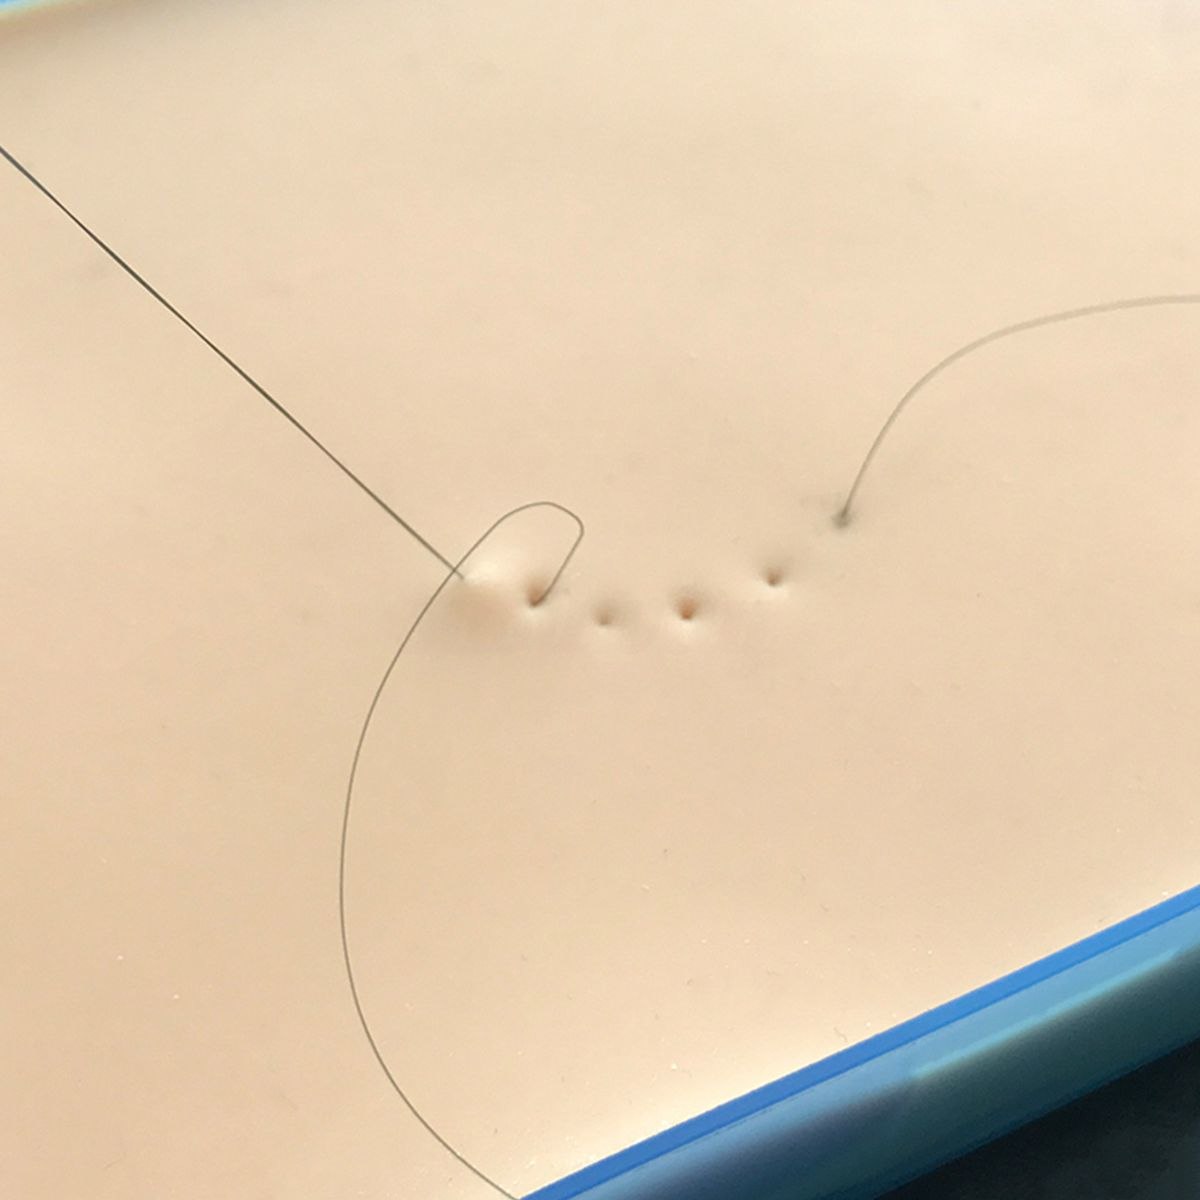 Silicone Suture Training Pad / FREE GLOBAL DELIVERY